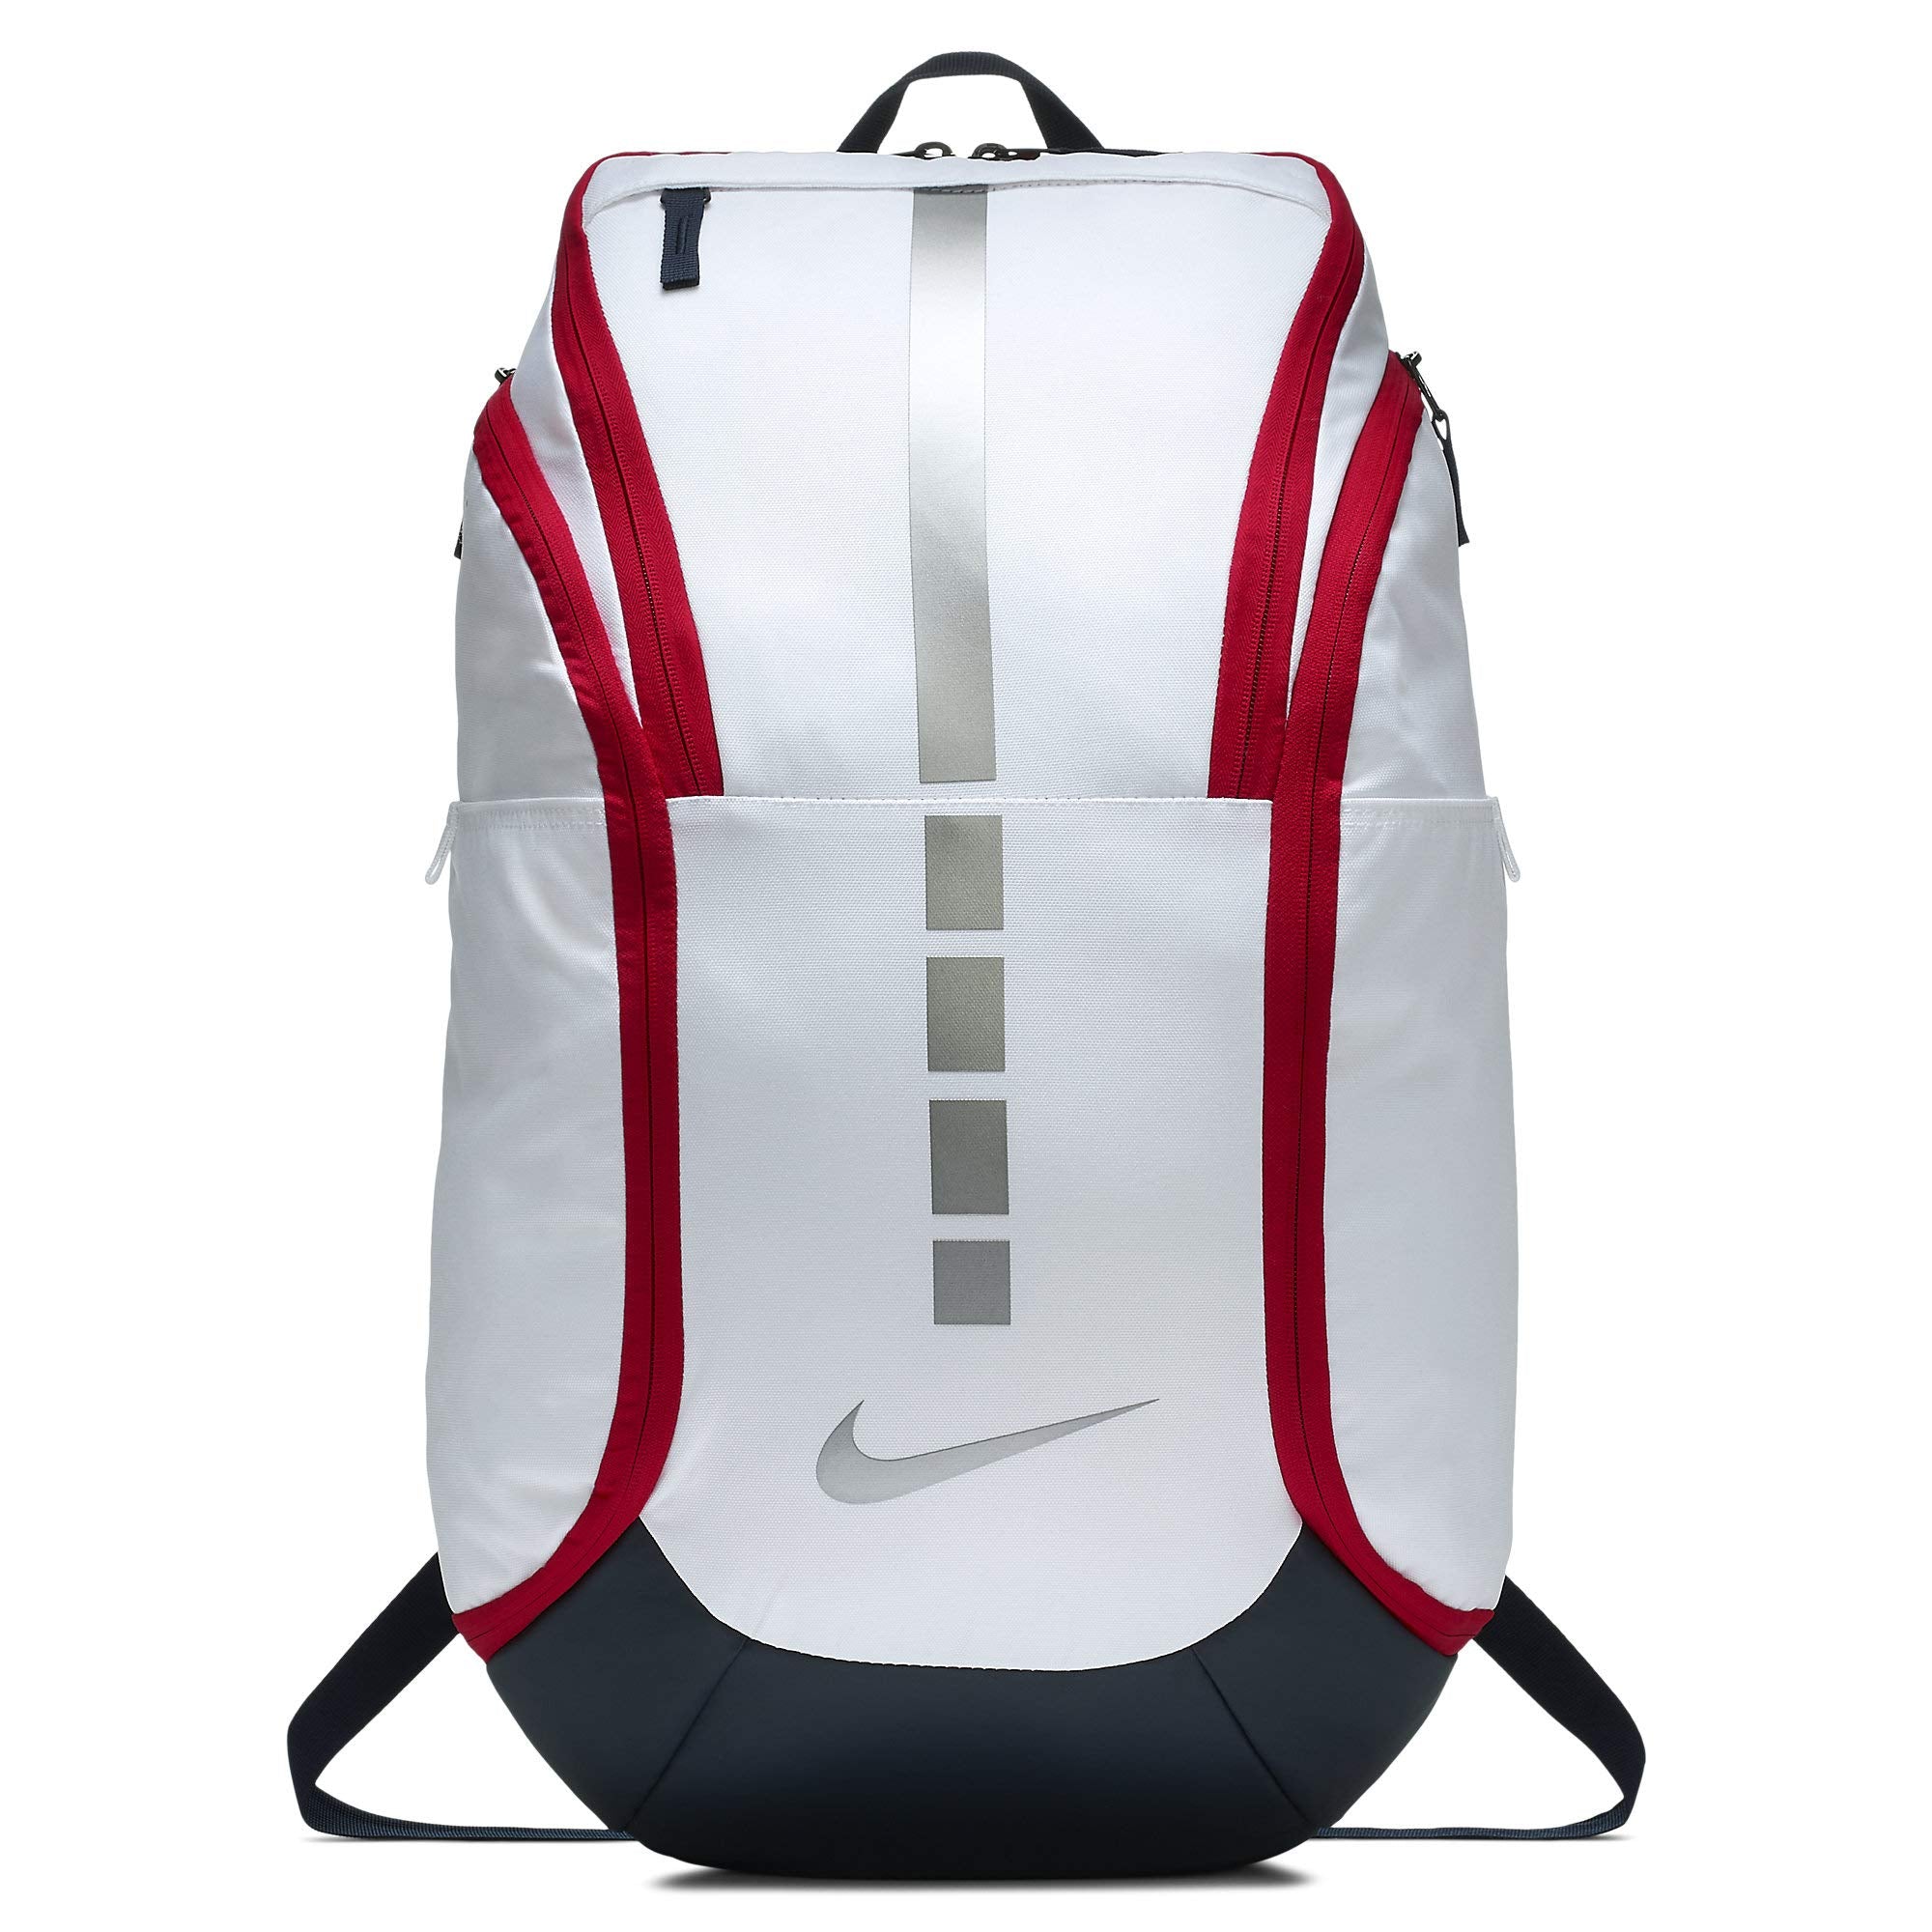 Wolt | Basketball Backpack Bag with Separate Ball Compartment and Shoes Pocket,Large Sports Equipment Bag for Basketball, Soccer, Rugby, Volleyball